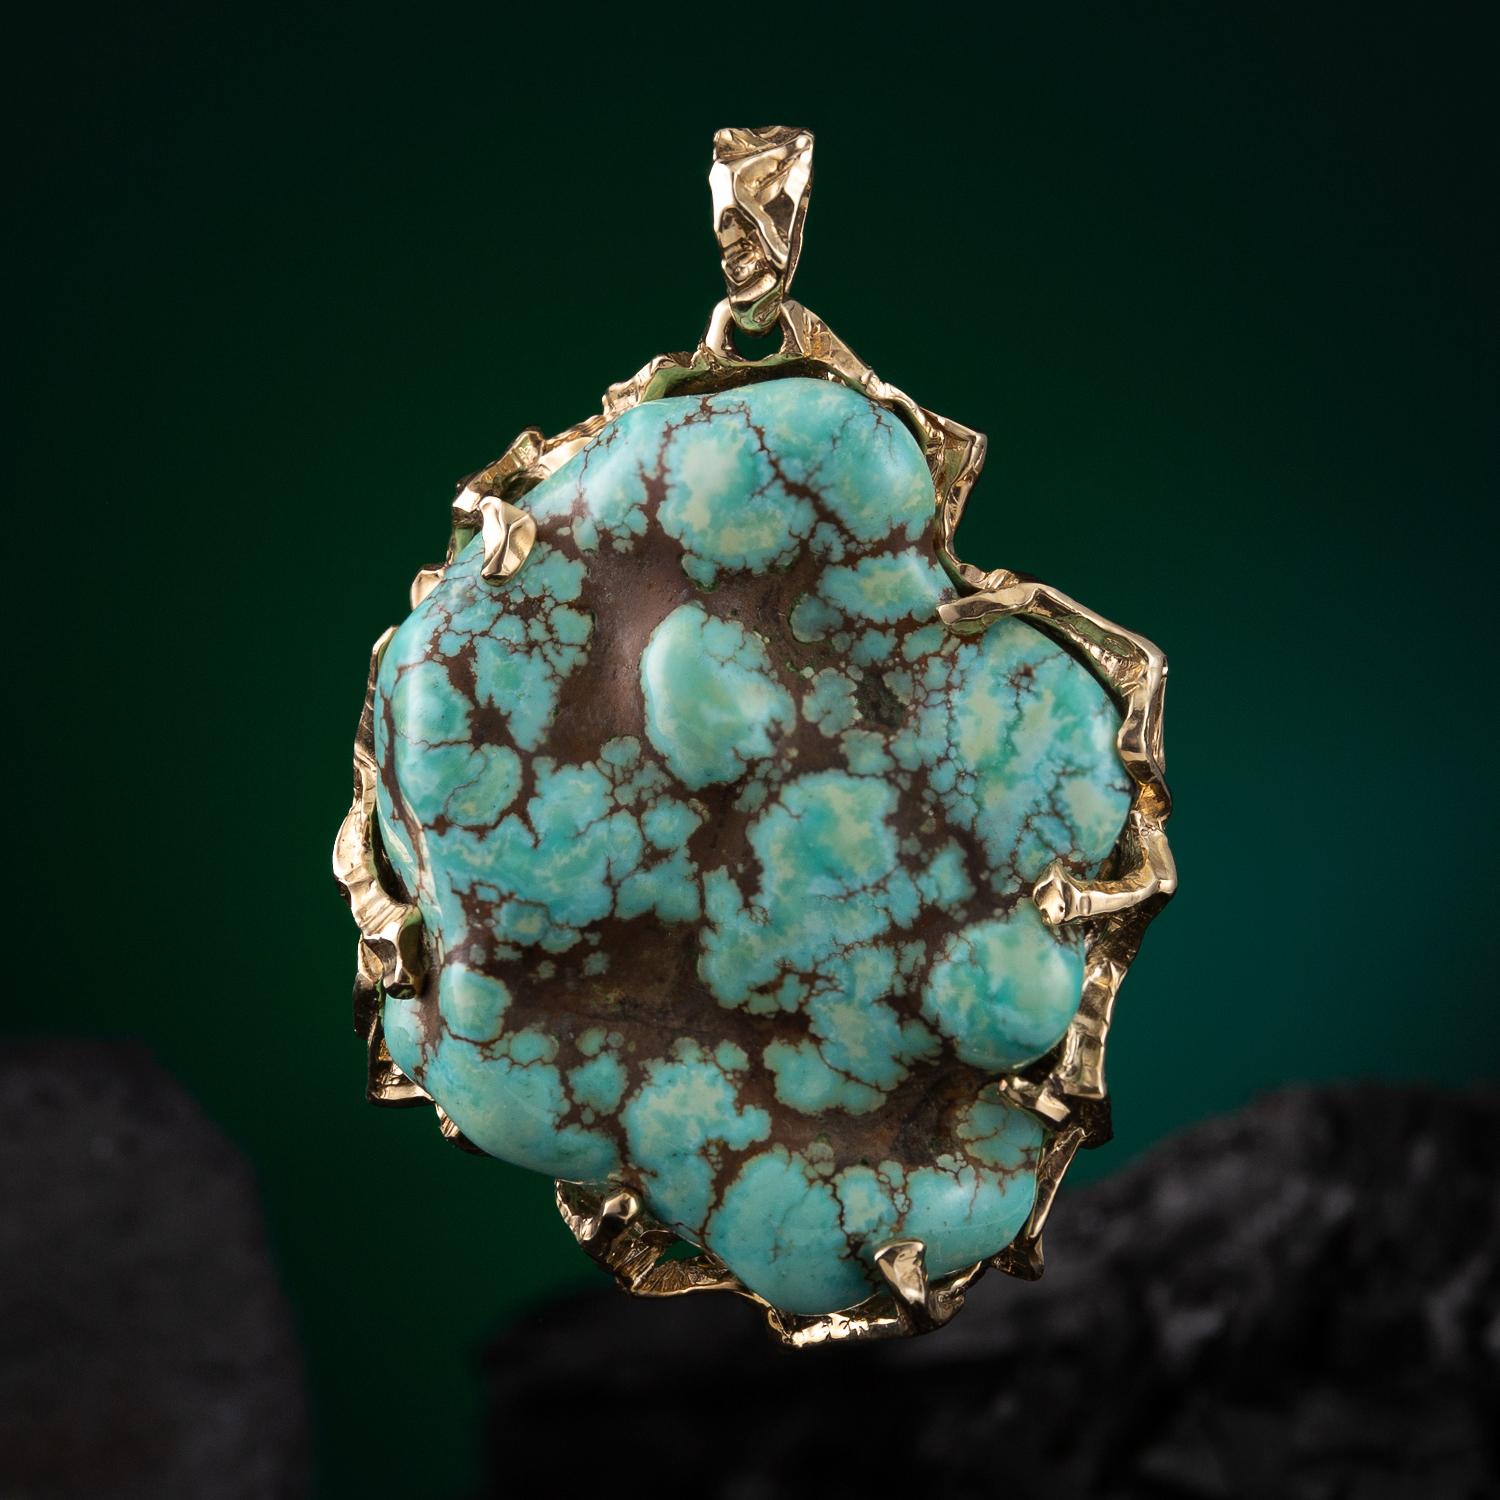 An amazing large 14K yellow gold necklace with natural lavender color Turquoise 
turquoise origin - Golden Hills mine, Kazakhstan
stone measurements - 0.35 х 1.26 х 1.54 in / 9 х 32 х 39 mm
stone weight - 58.80 carats
pendant weight - 20.50